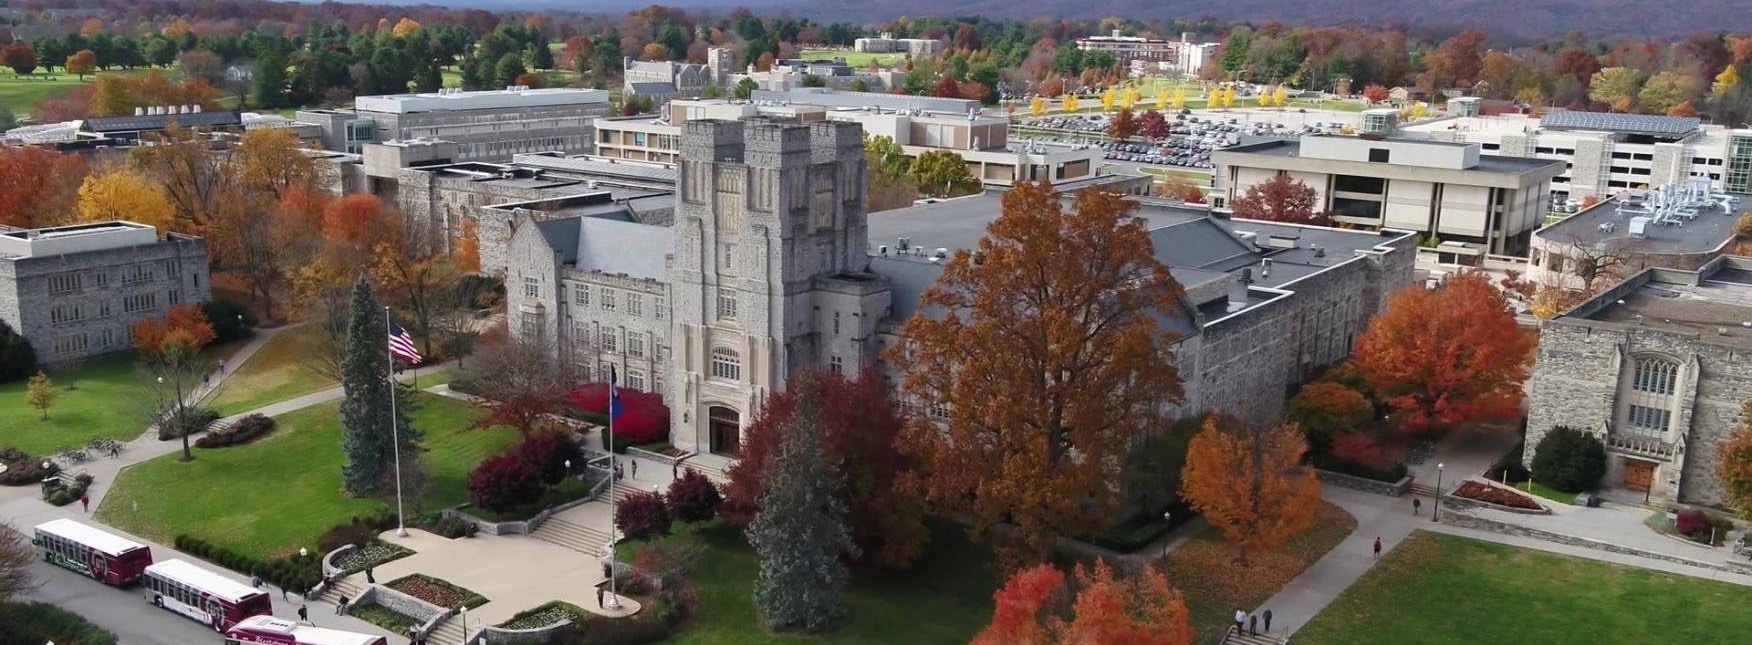 Virginia Tech from the front during fall